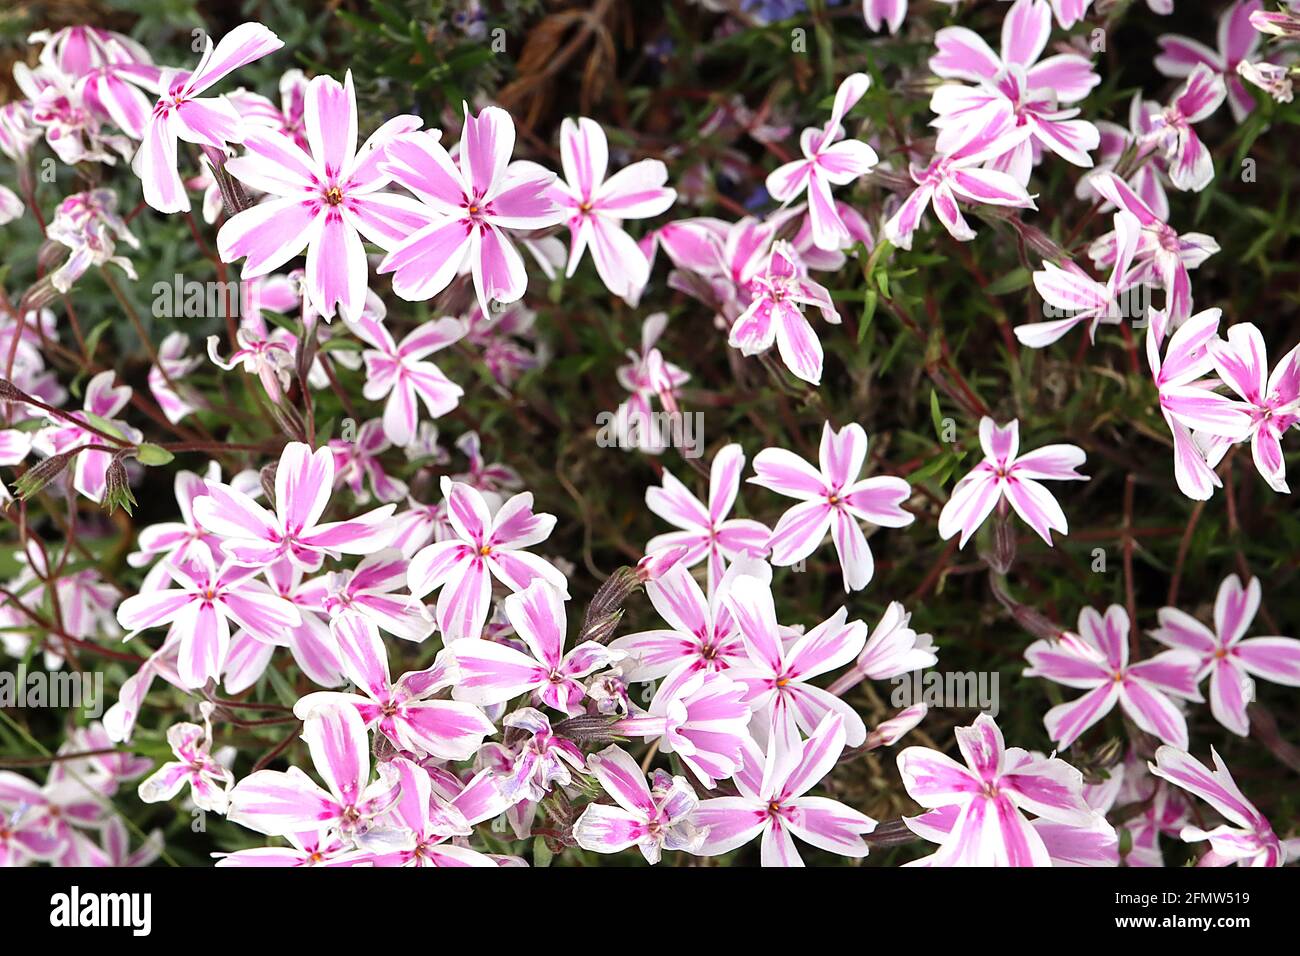 Phlox subulata ‘Candy Stripe’ creeping phlox Candy Stripe – white star-shaped flowers with pink stripe brushmarks and small basal cerise marks Stock Photo